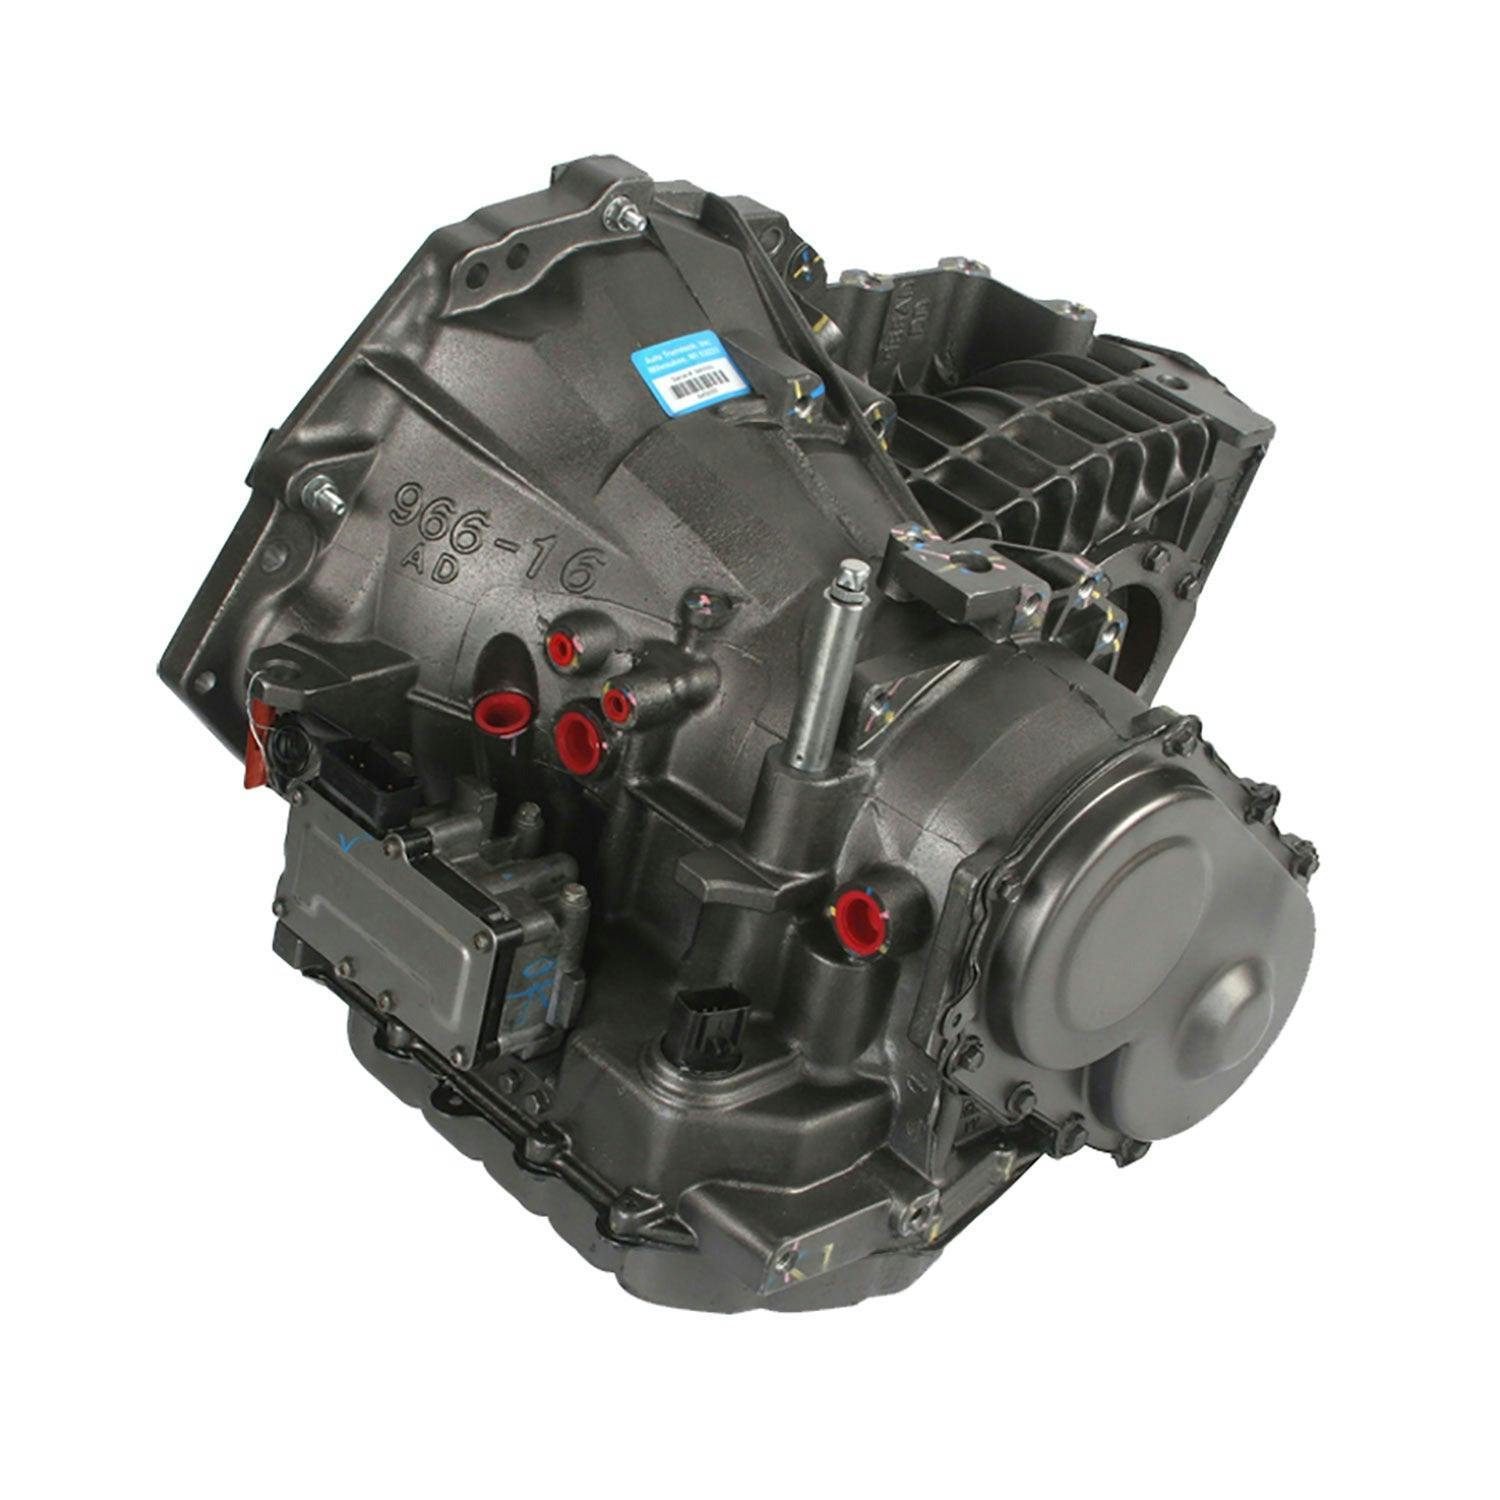 Automatic Transmission for 1995-1996 Chrysler Cirrus/Sebring and Dodge Avenger/Stratus FWD with 2.5L V6 Engine